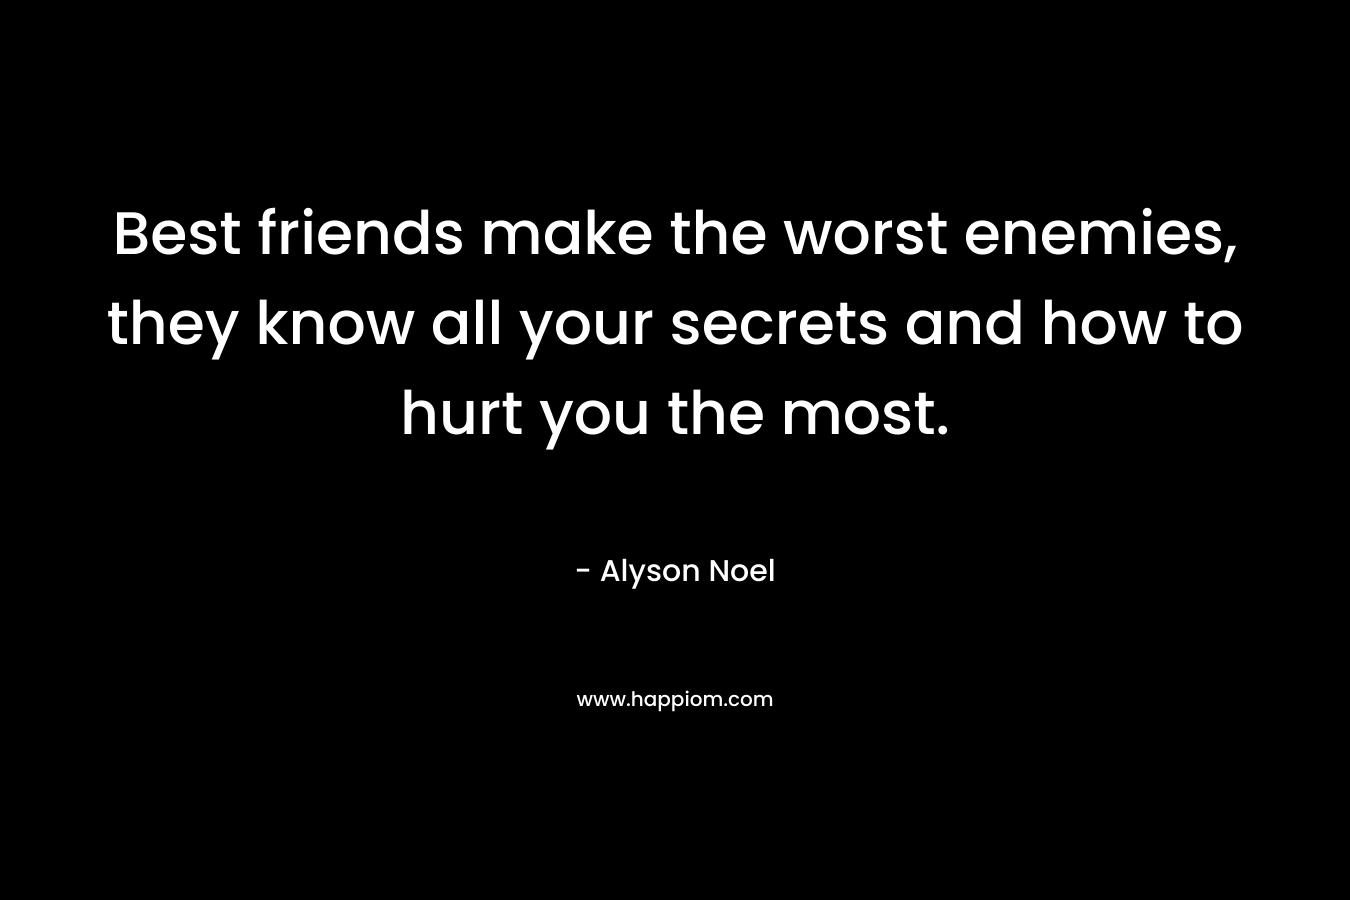 Best friends make the worst enemies, they know all your secrets and how to hurt you the most. – Alyson Noel